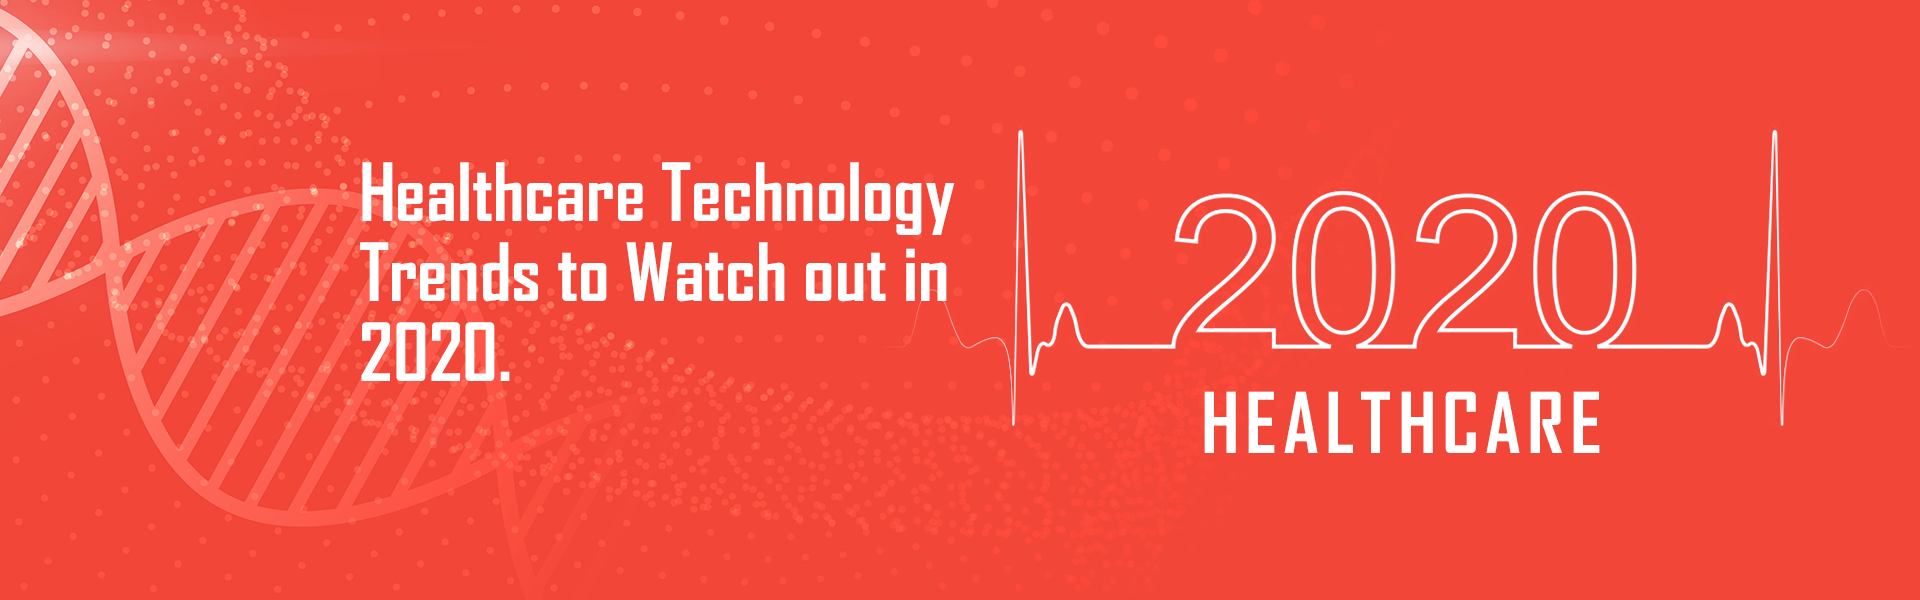 Healthcare Technology Trends to Watch out in 2020 and Beyond